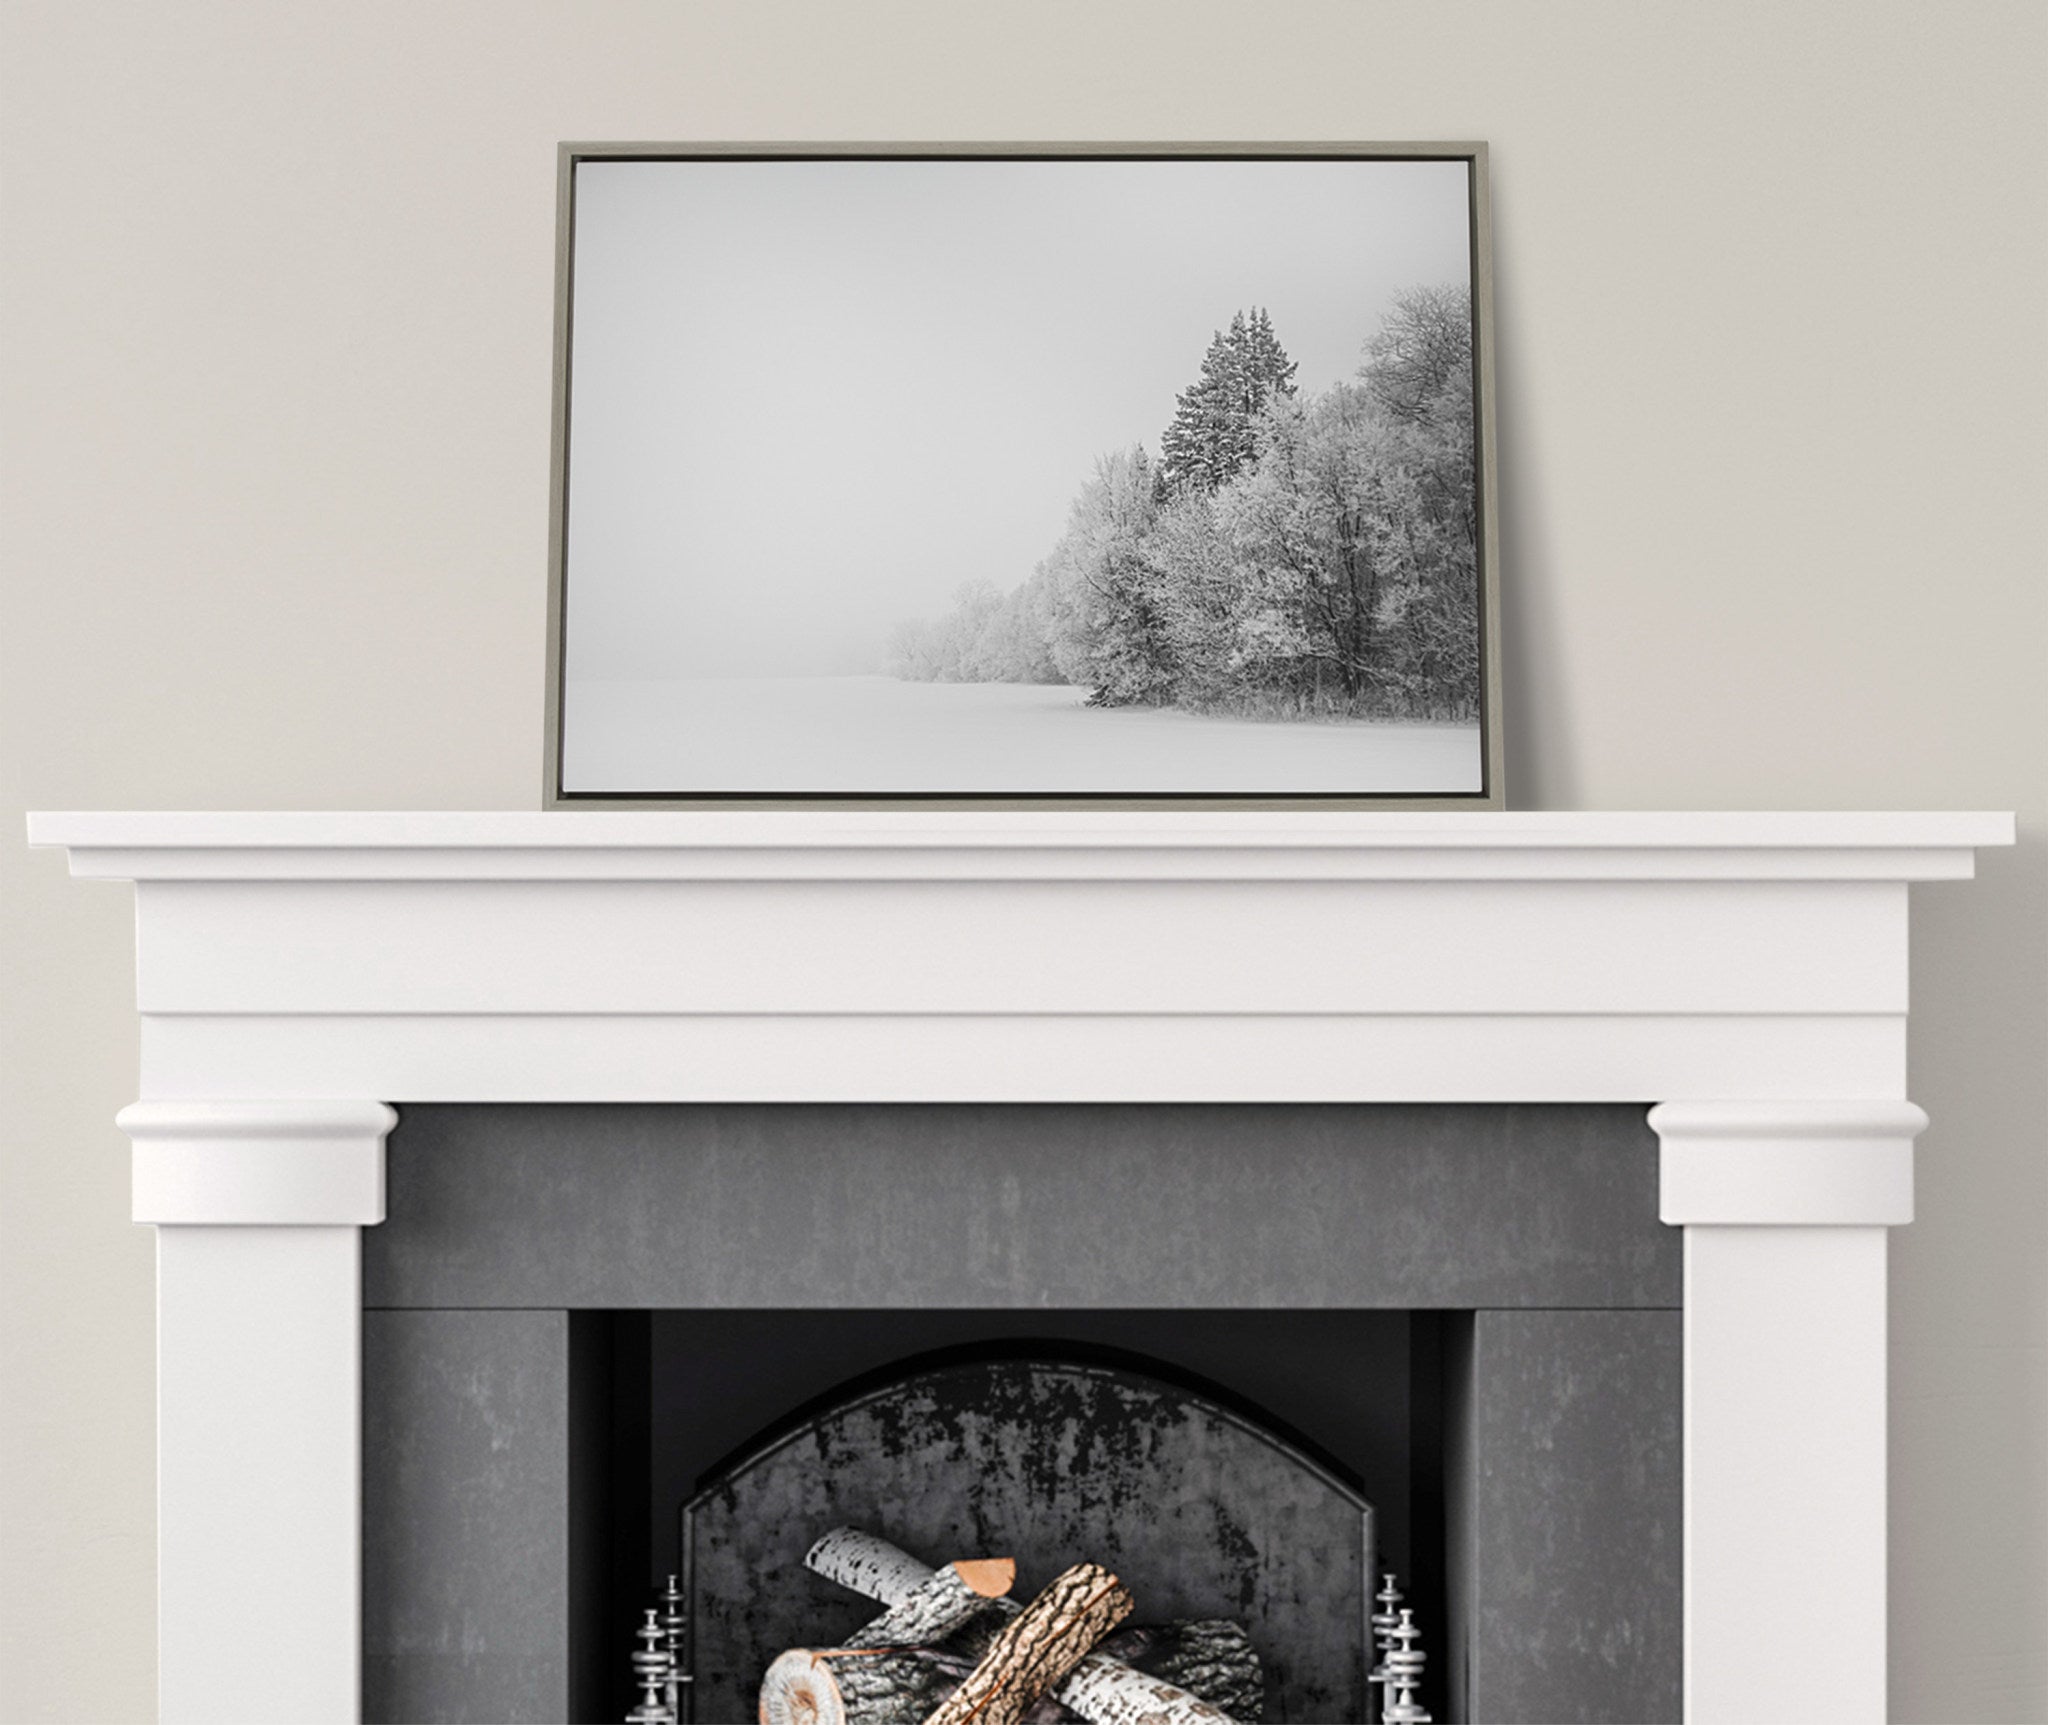 Sylvie Black and White Snow Day Framed Canvas by Emiko and Mark Franzen of F2Images